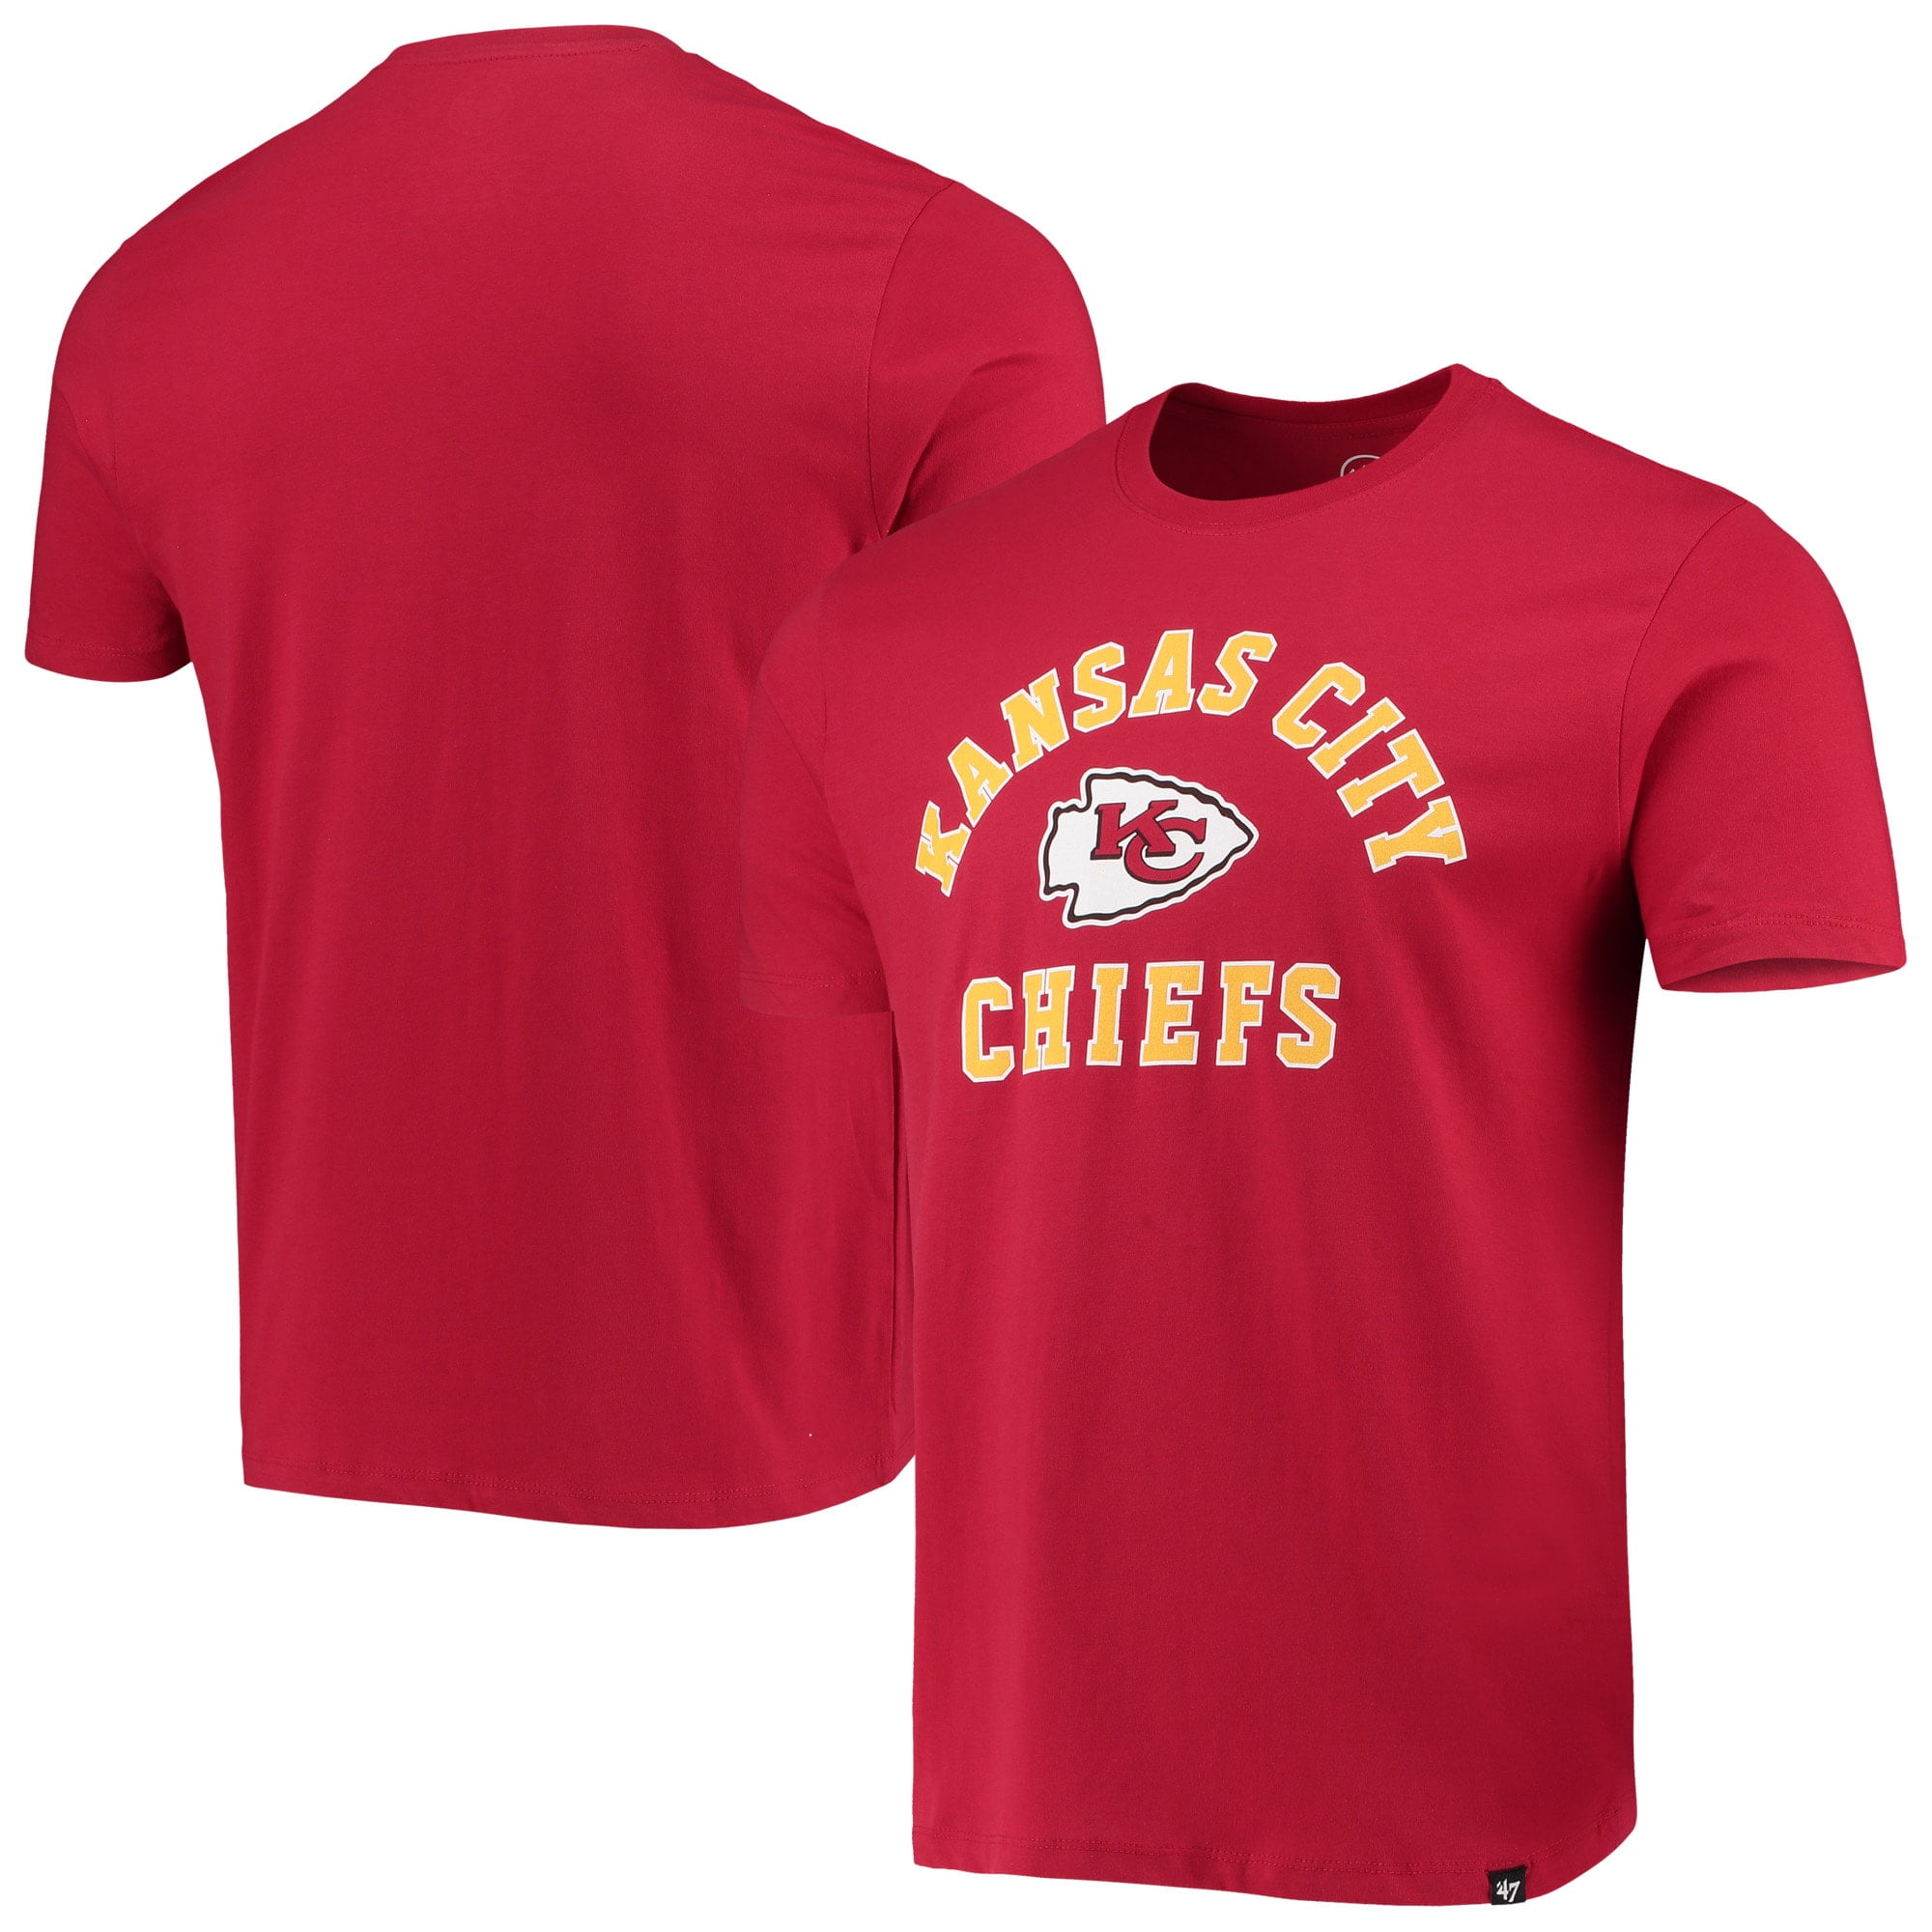 Varsity Arch Super Rival T-Shirt - Red 